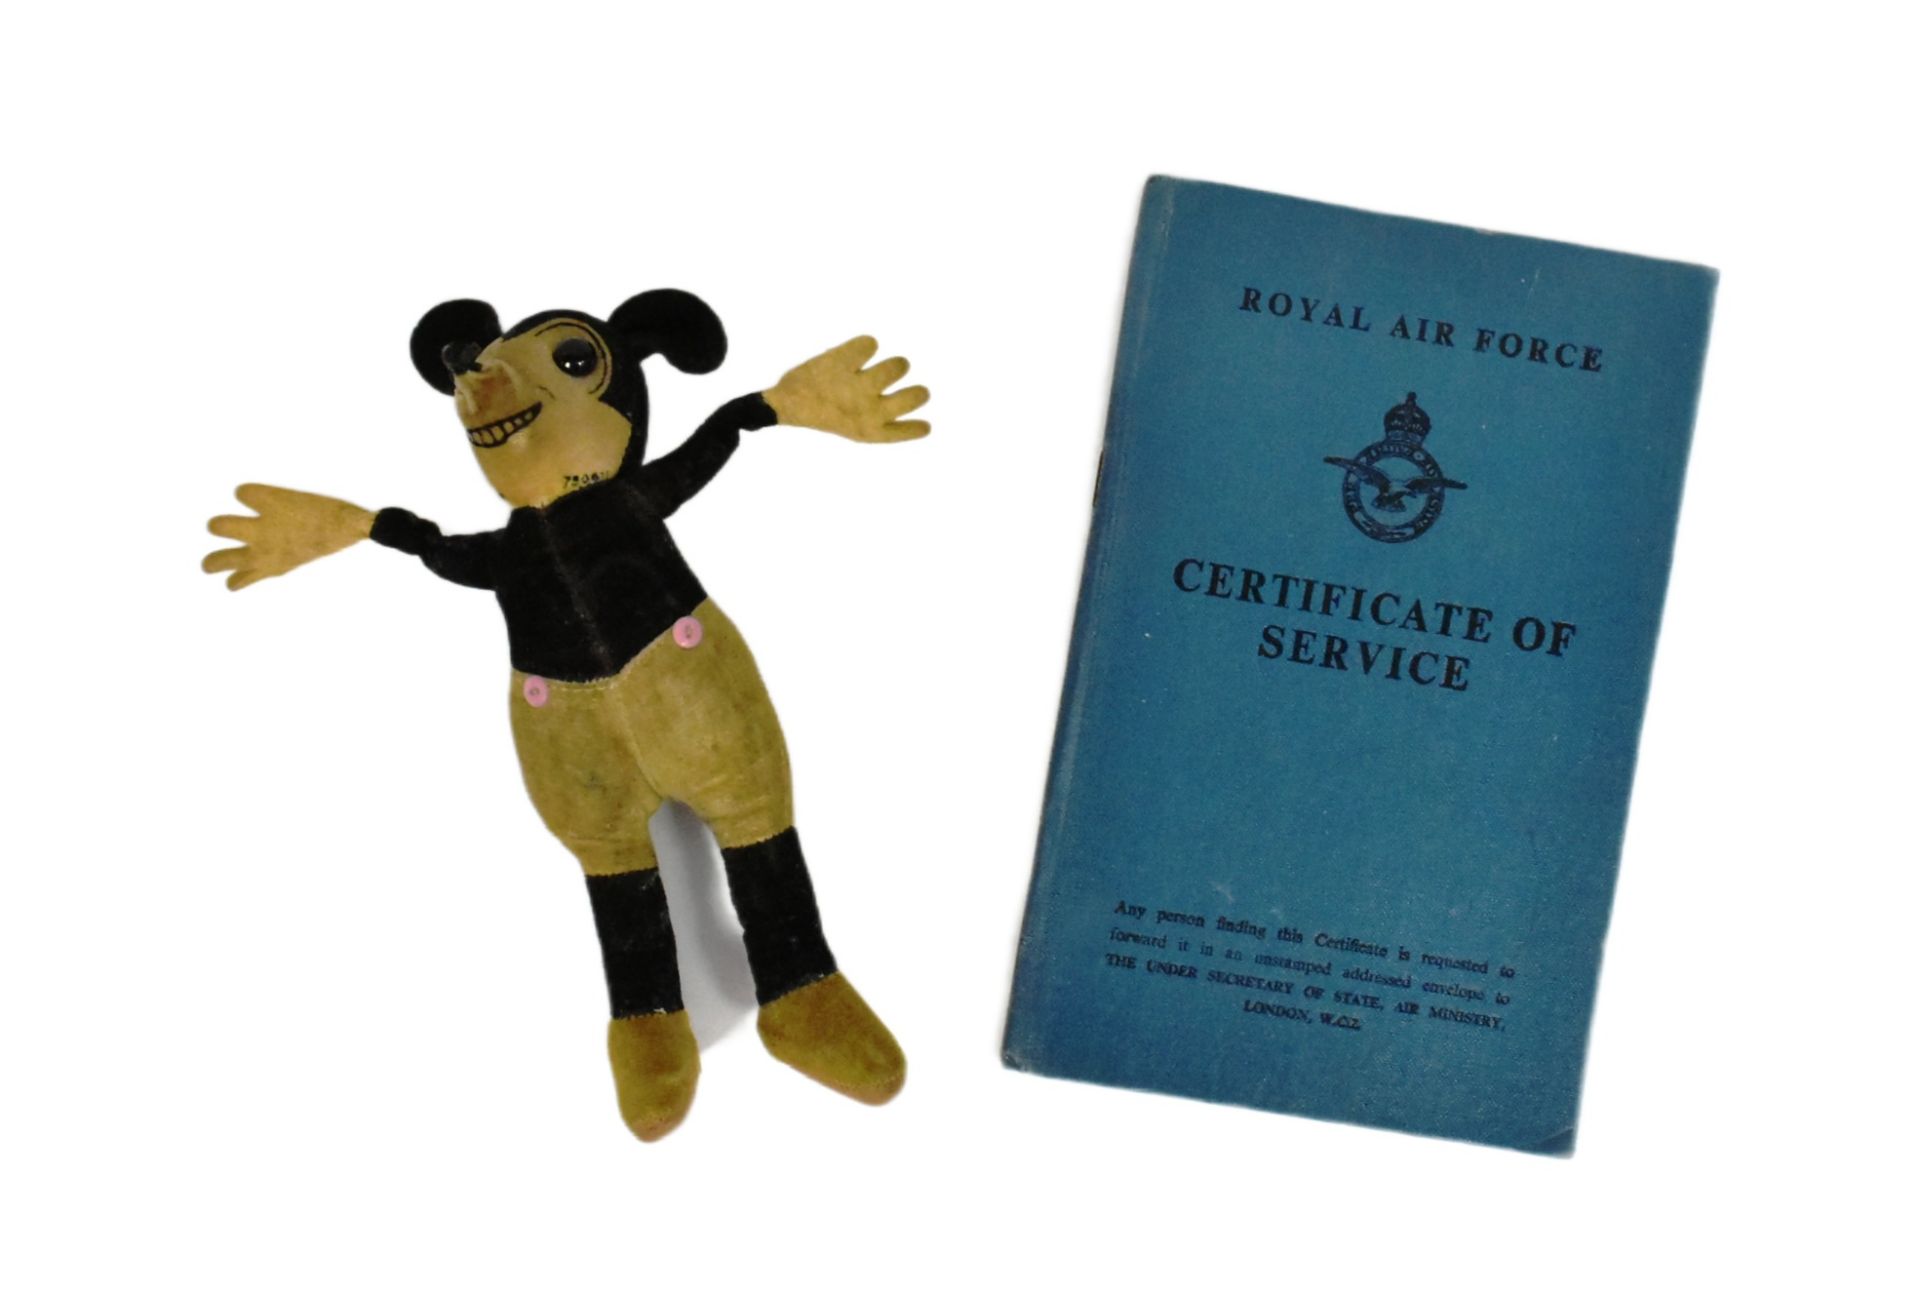 DEANS RAG BOOK CO - 1930S MICKEY MOUSE PLUSH TOY - RAF INTEREST